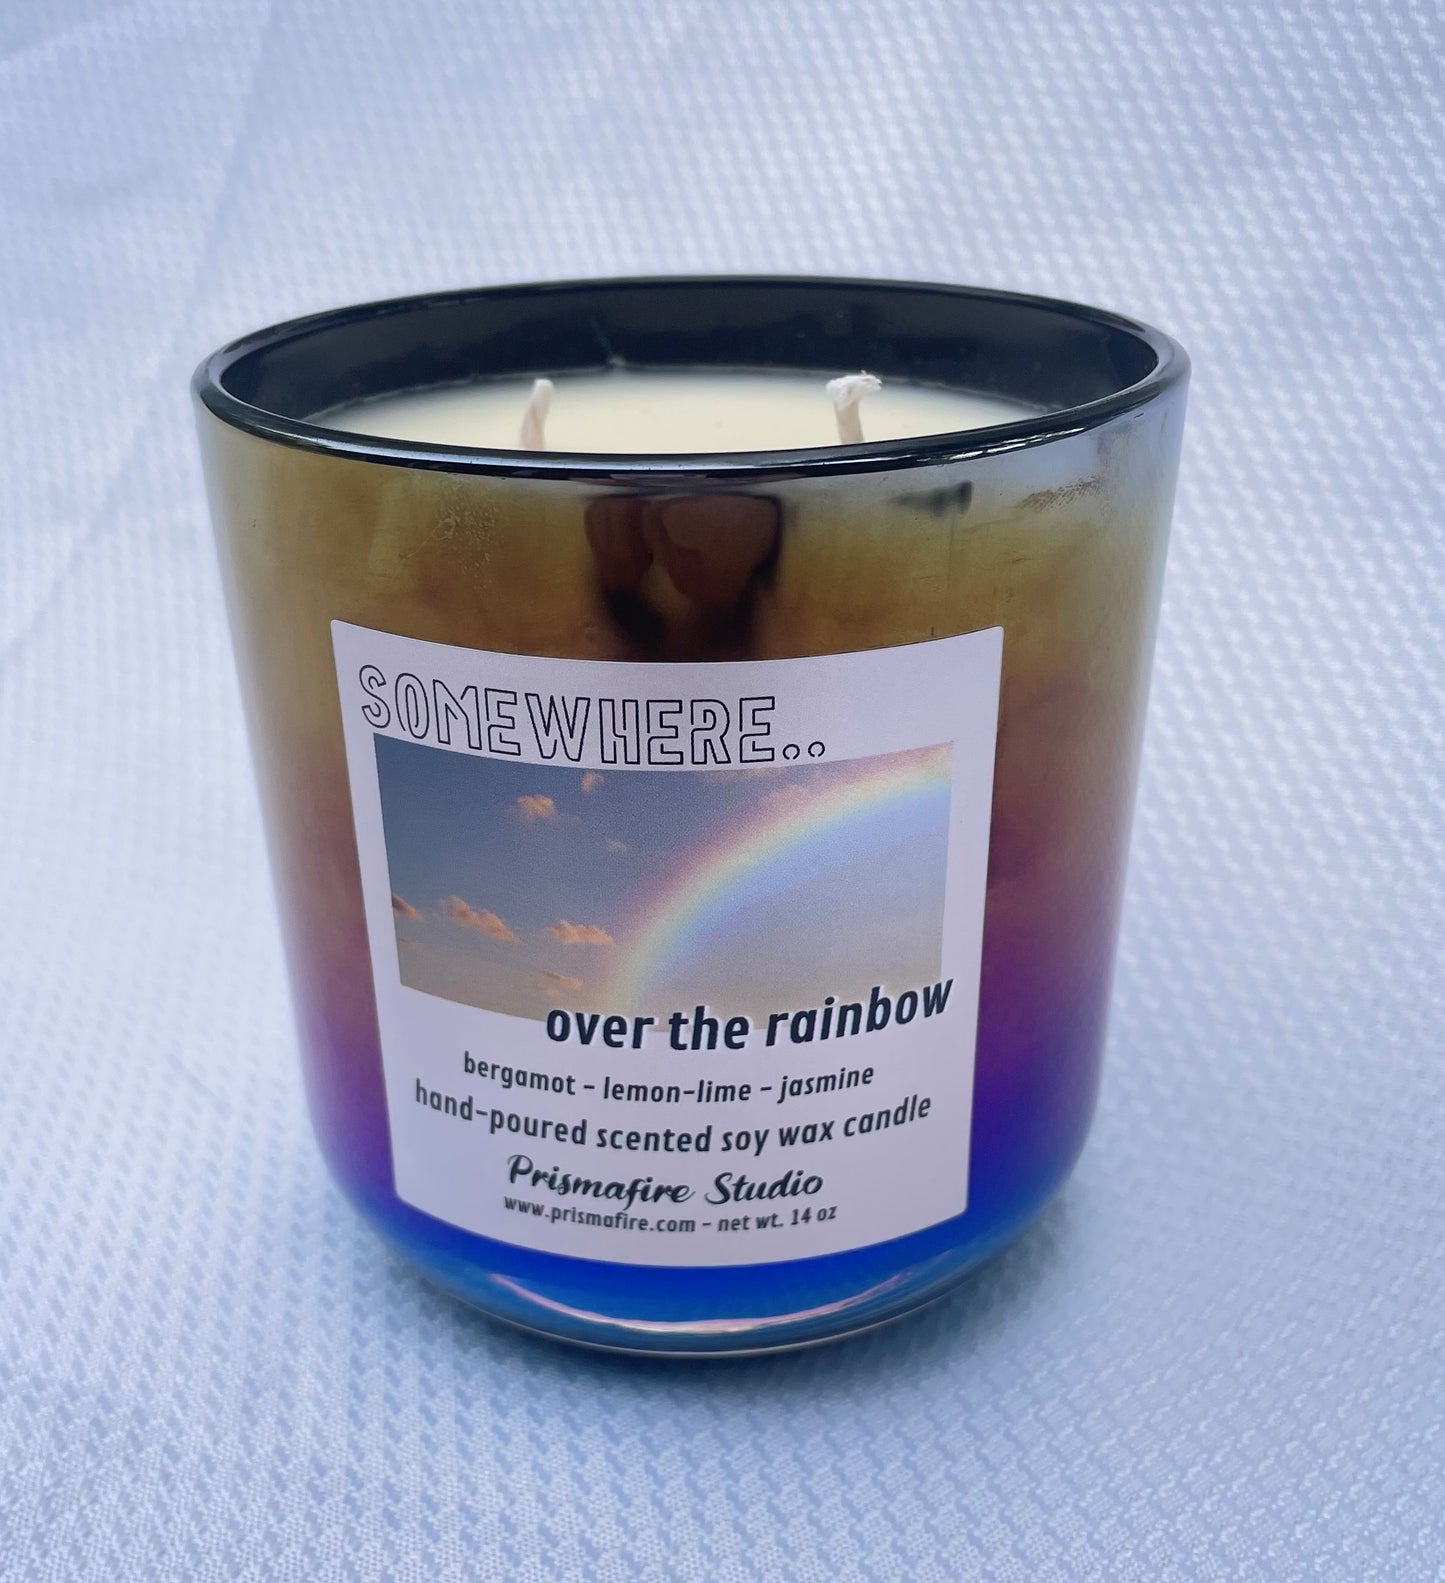 Somewhere Over the Rainbow 2-wick Soy Wax Candle